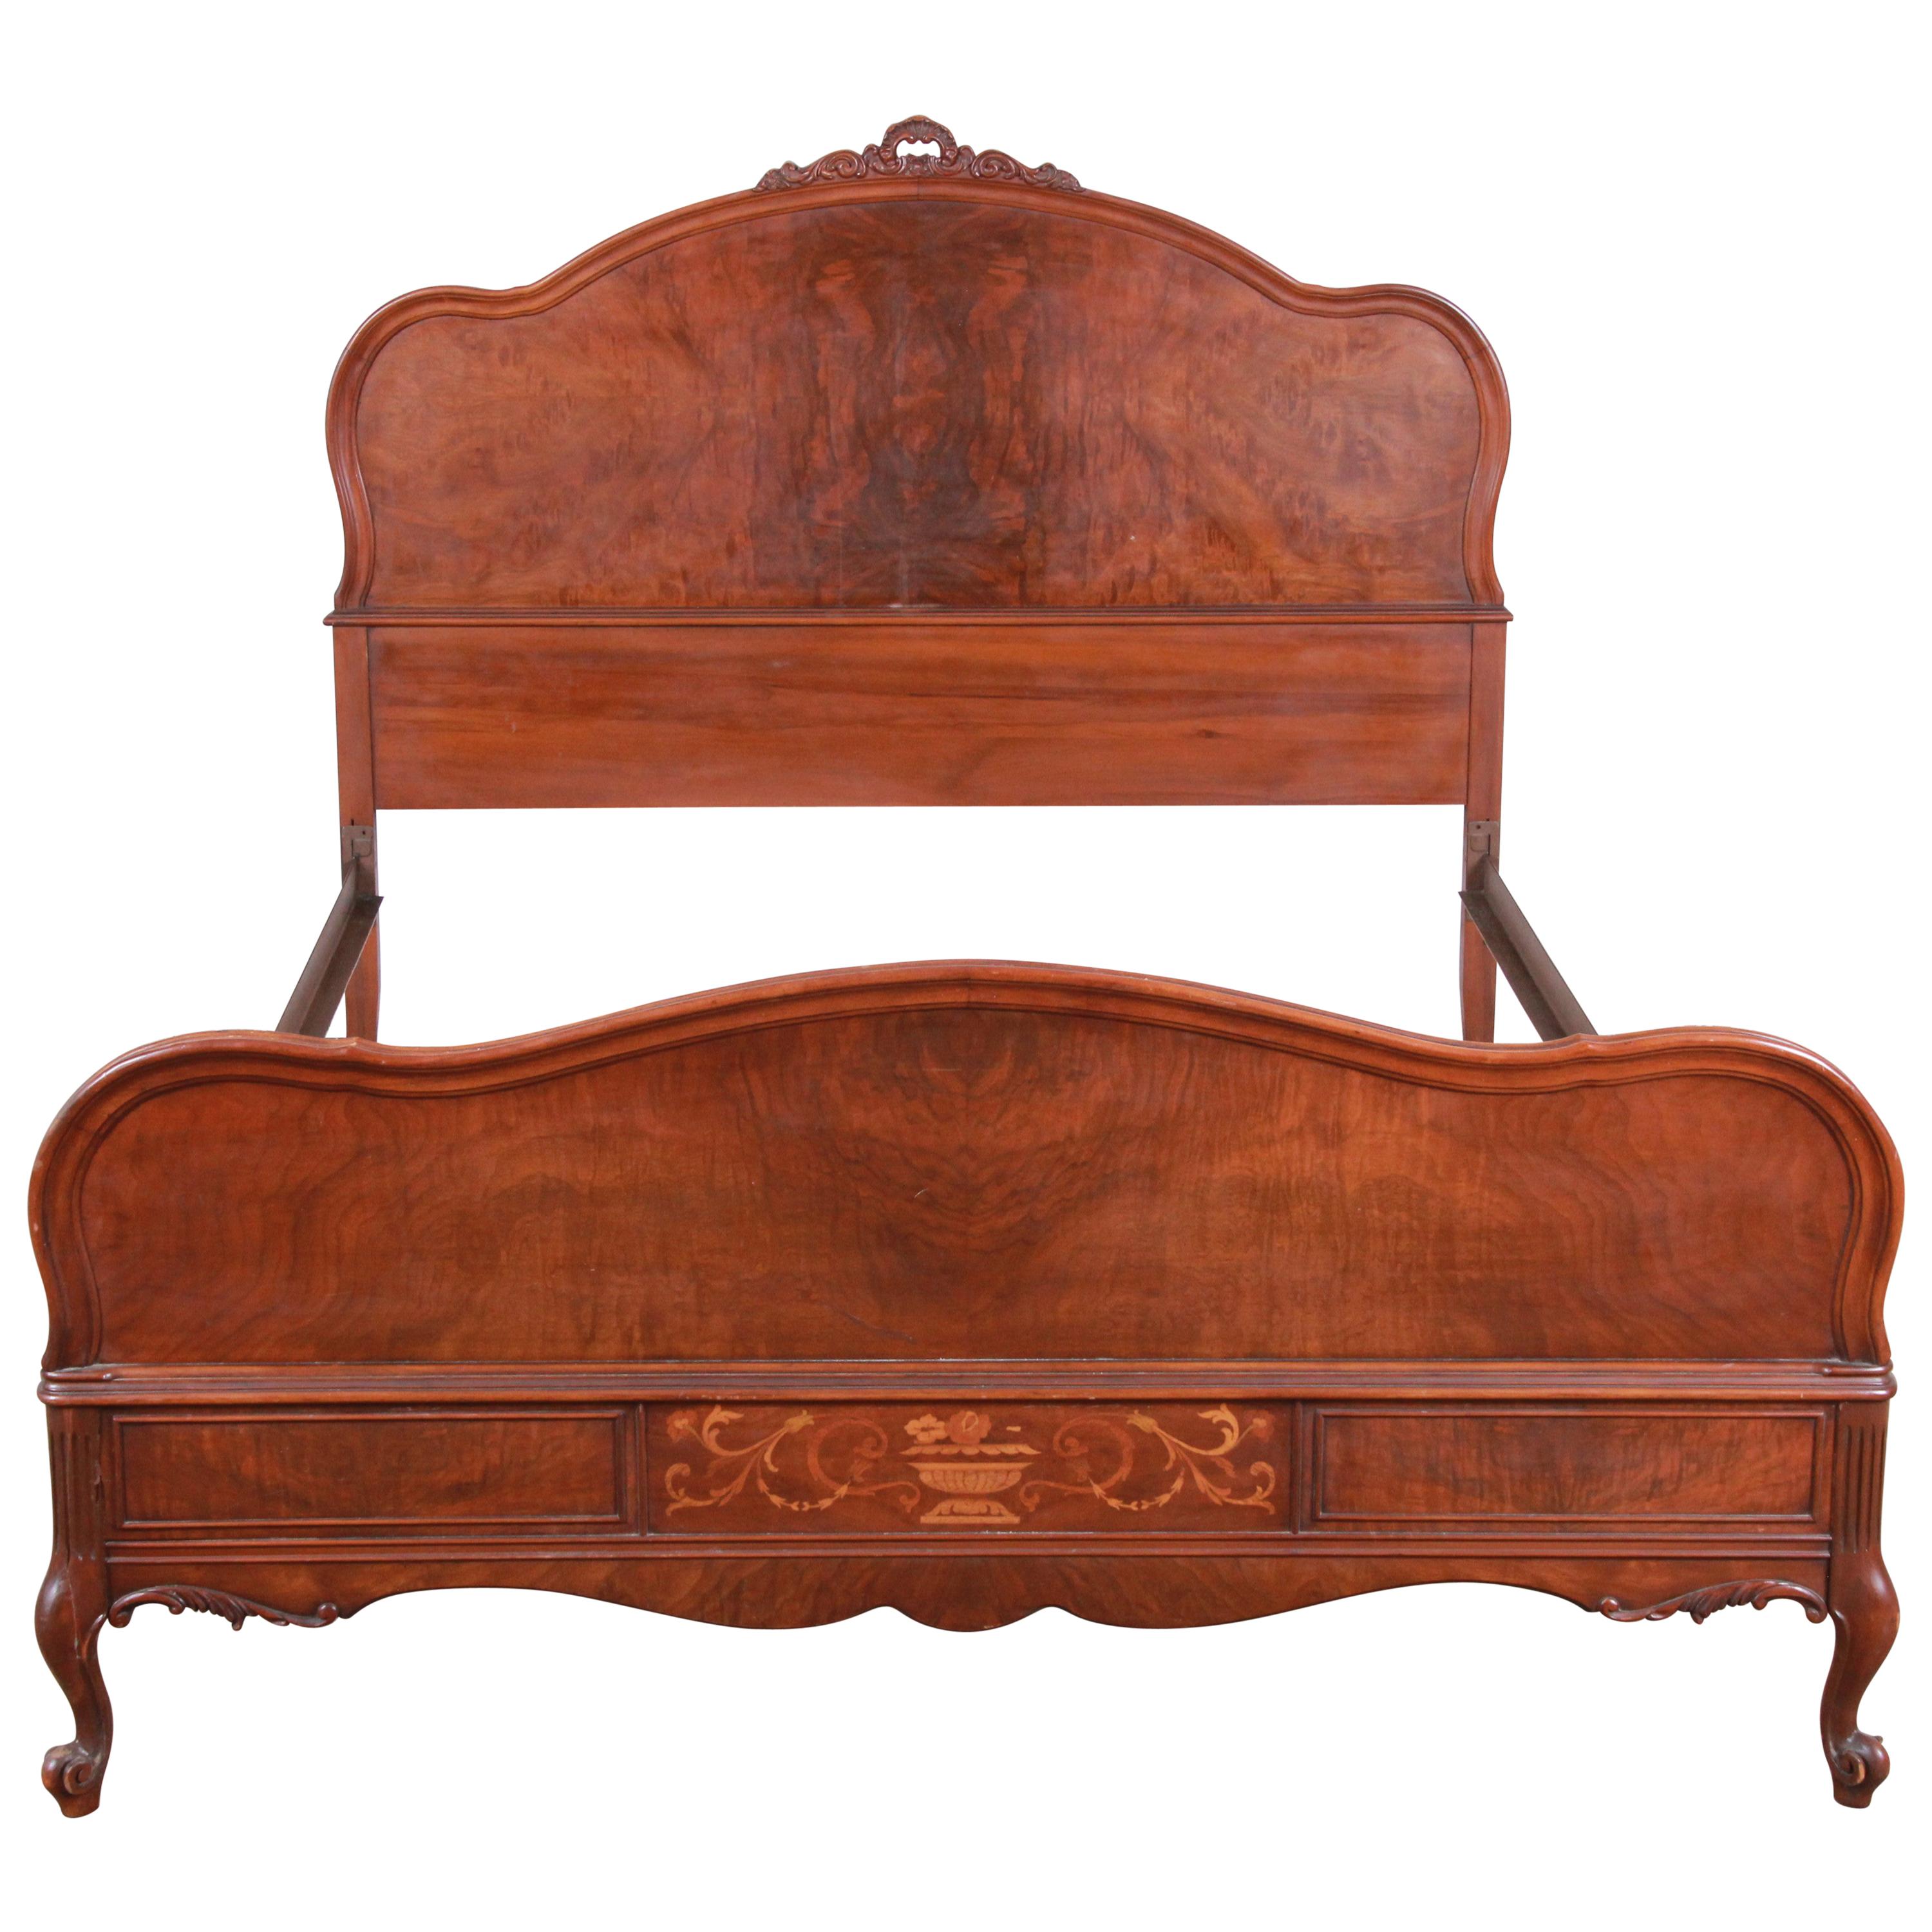 Kent Coffey French Provincial Louis XV Style Inlaid Burled Walnut Full Size Bed